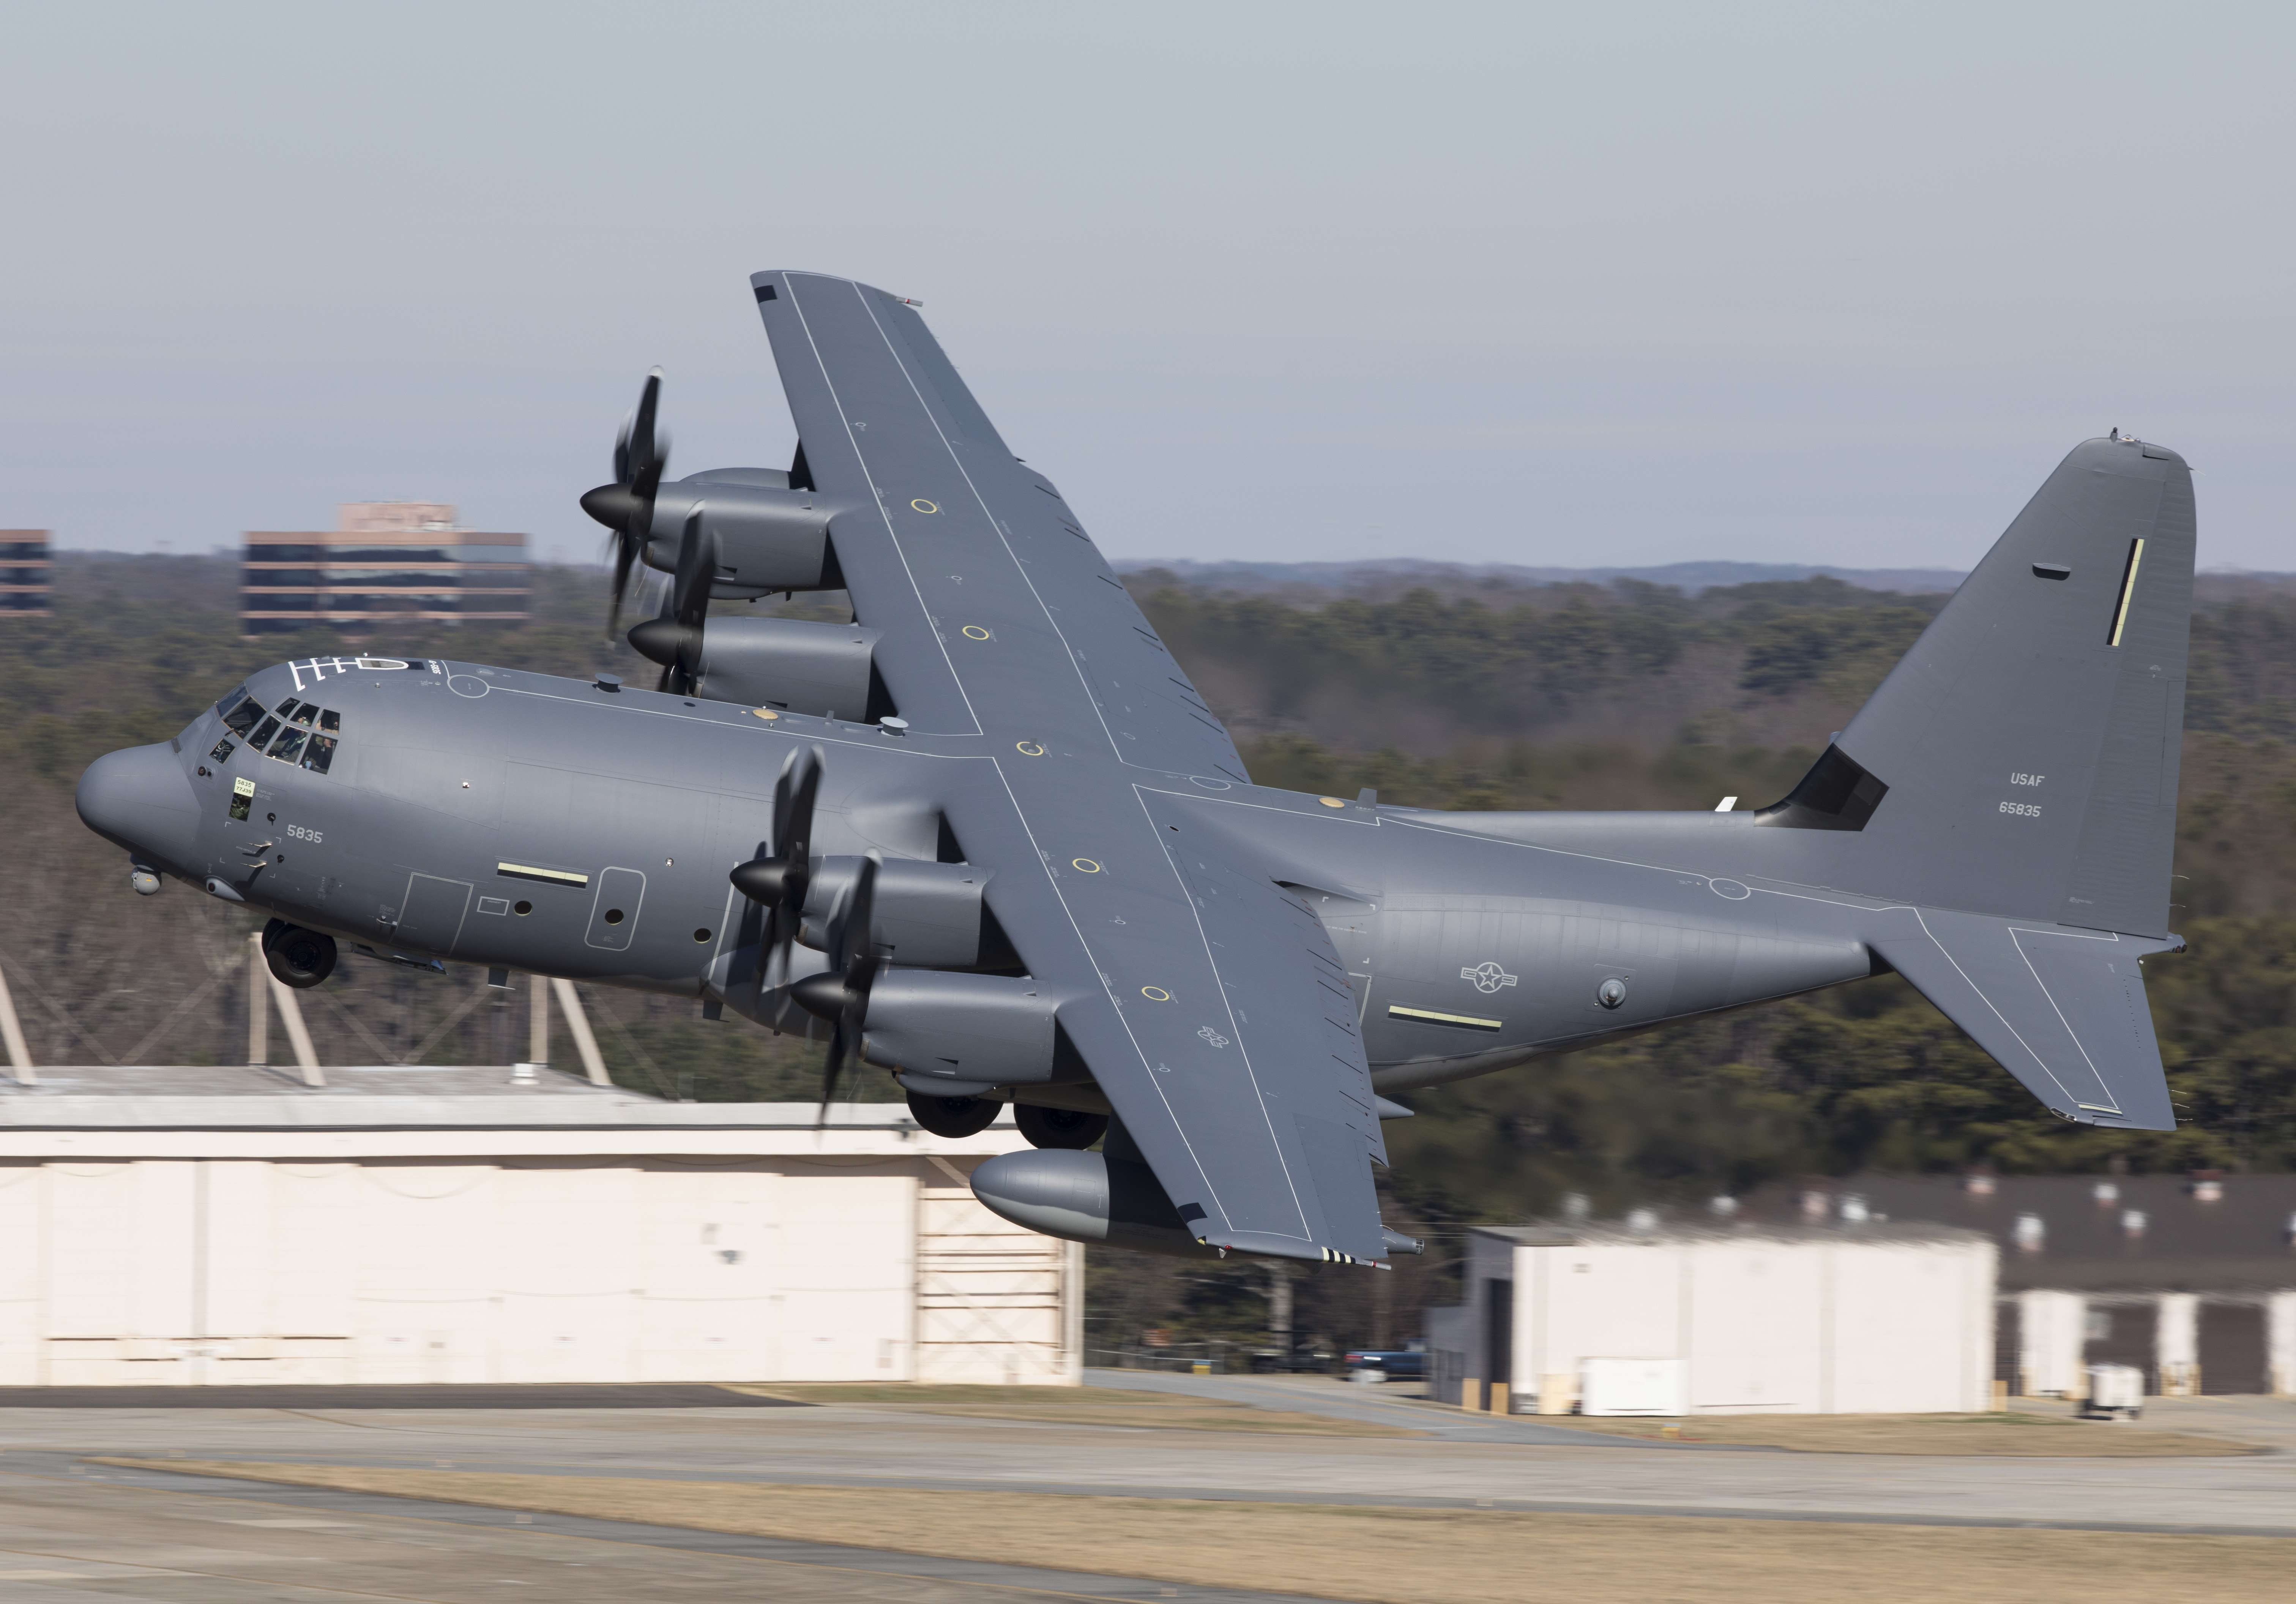 Airlifters like the MC-130J have the potential to deploy large quantities of JASSM-ERs, providing a significant increase in long-range standoff scale. (Photo by Lockheed Martin)